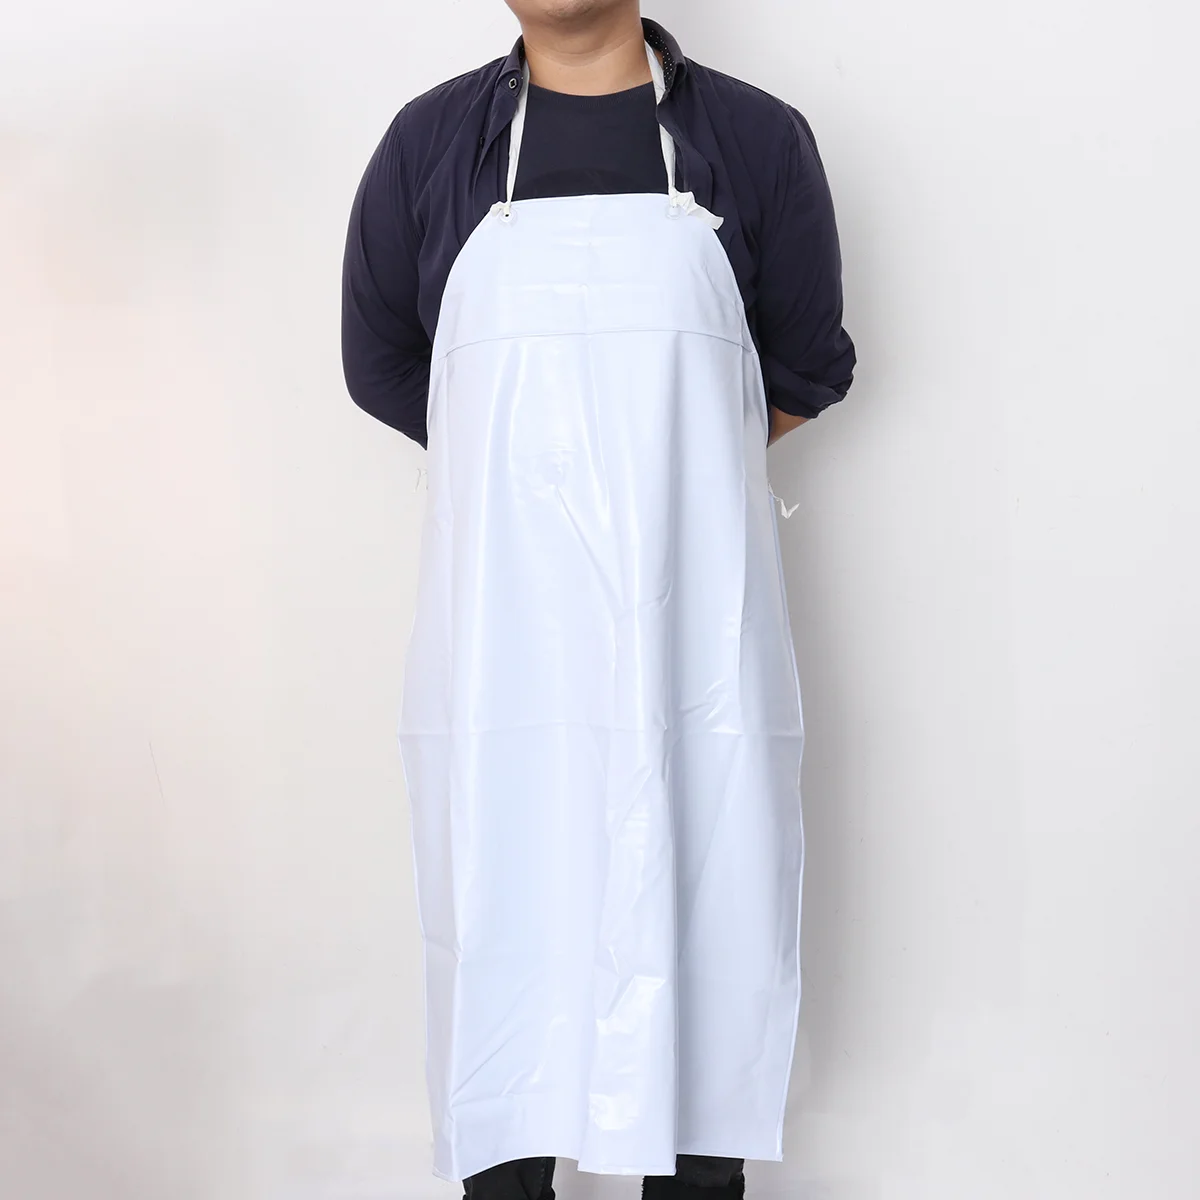 

Adjustable Bib Aprons Oil Stain Resistant Apron Chef Apron Cooking Kitchen Grilling Aprons for Men